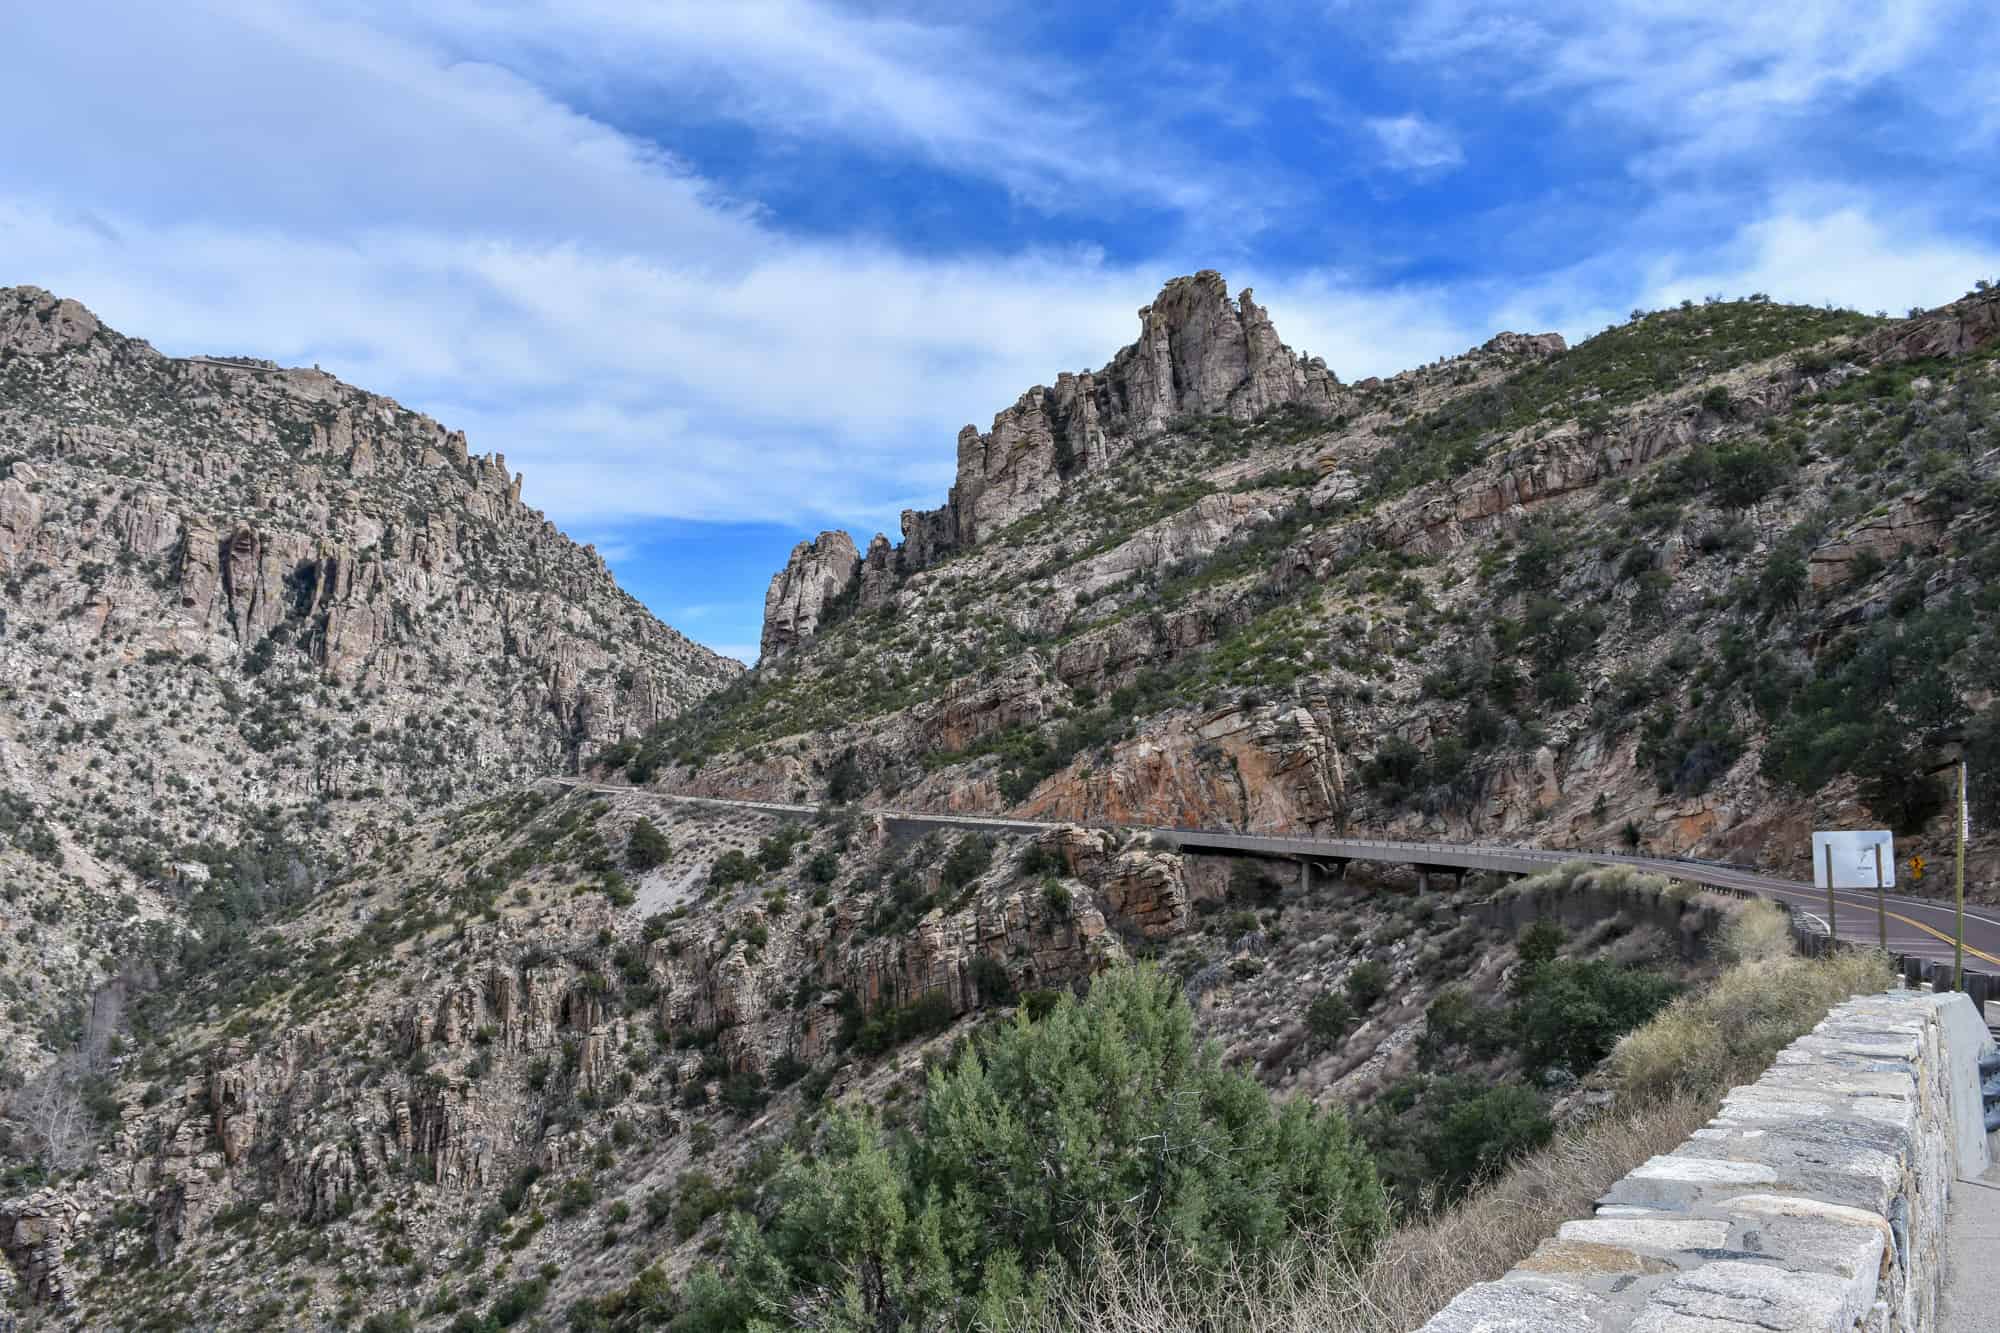 the scenic drive at mt lemmon, photo shows the road heading between two mountains in the distance